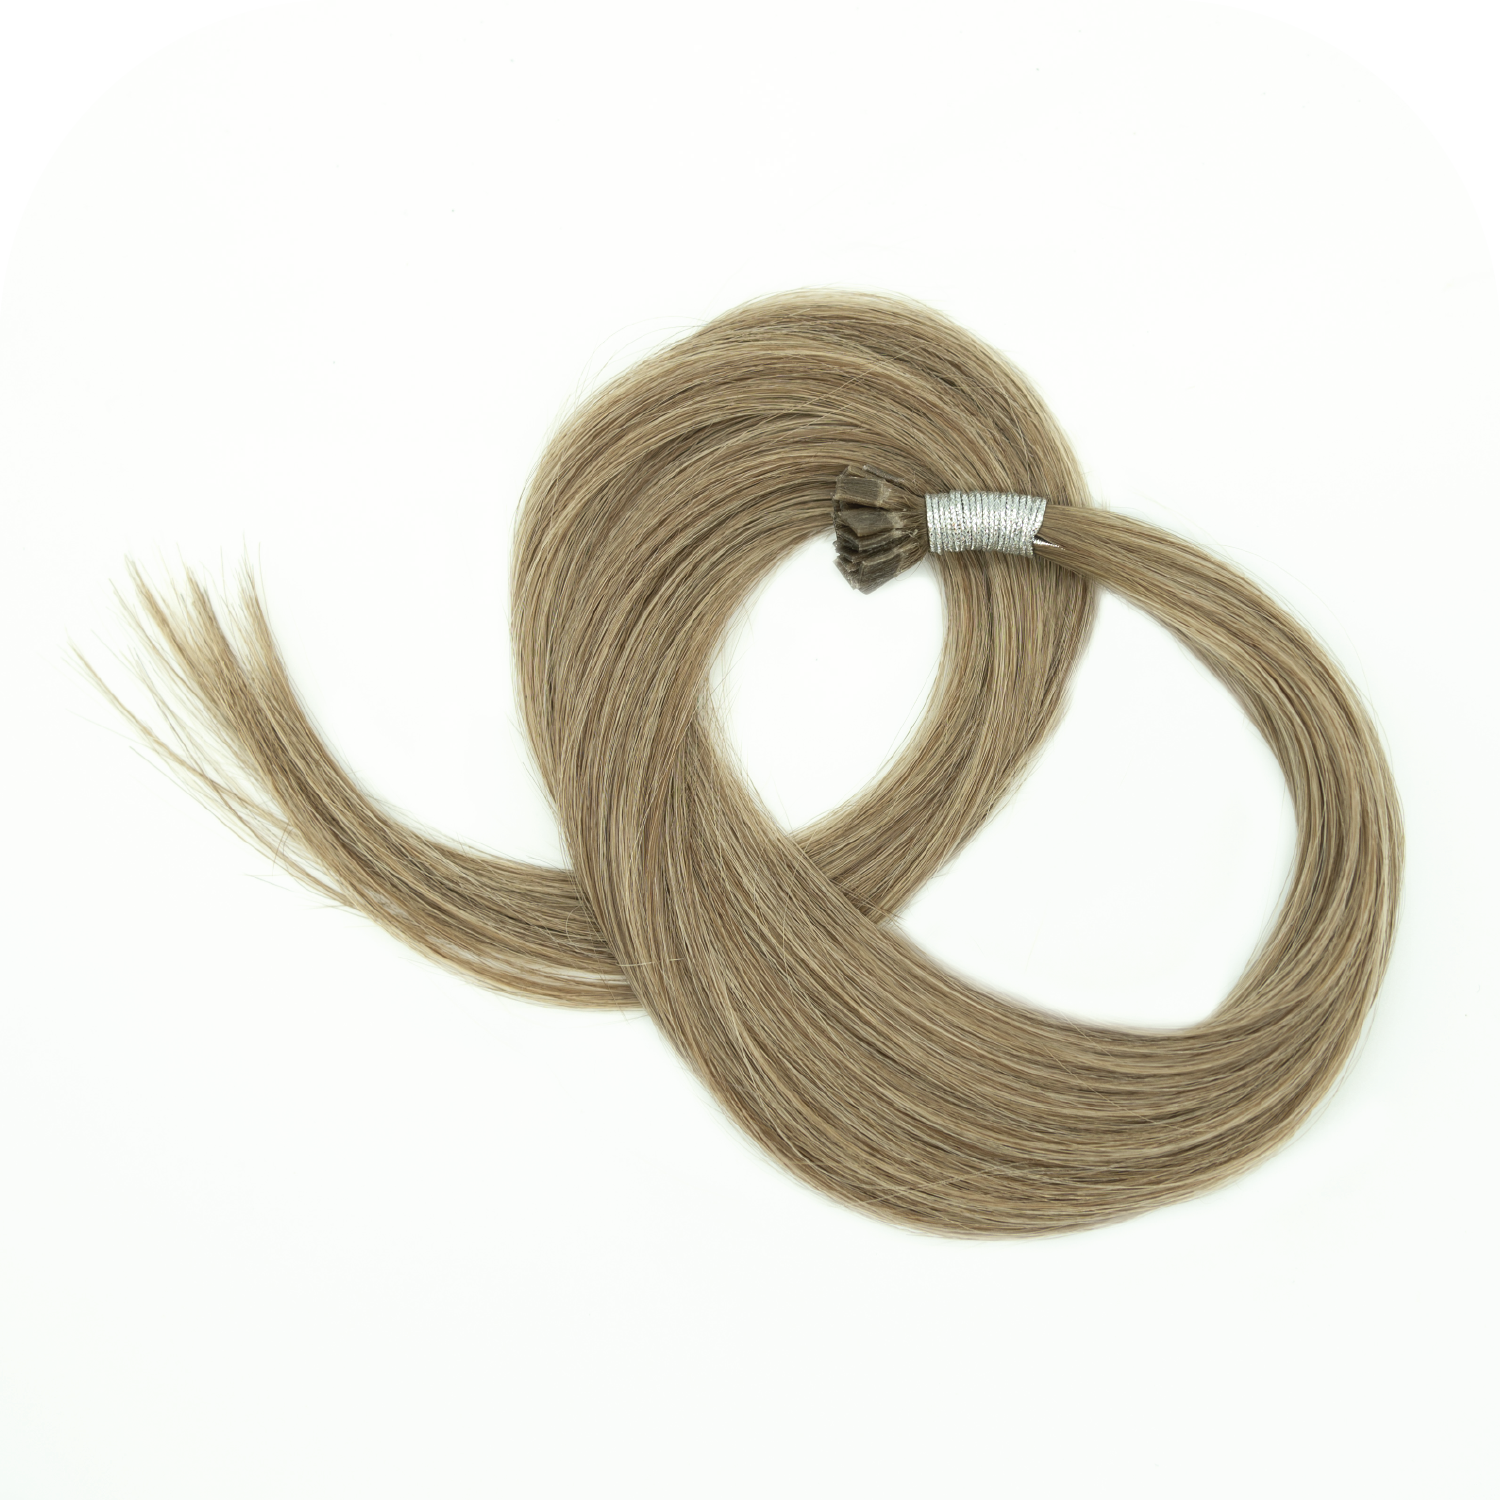 Couture Hair Co. Couture Tip or K Tip Extensions in Color Dark Blond Mix #8/8/60